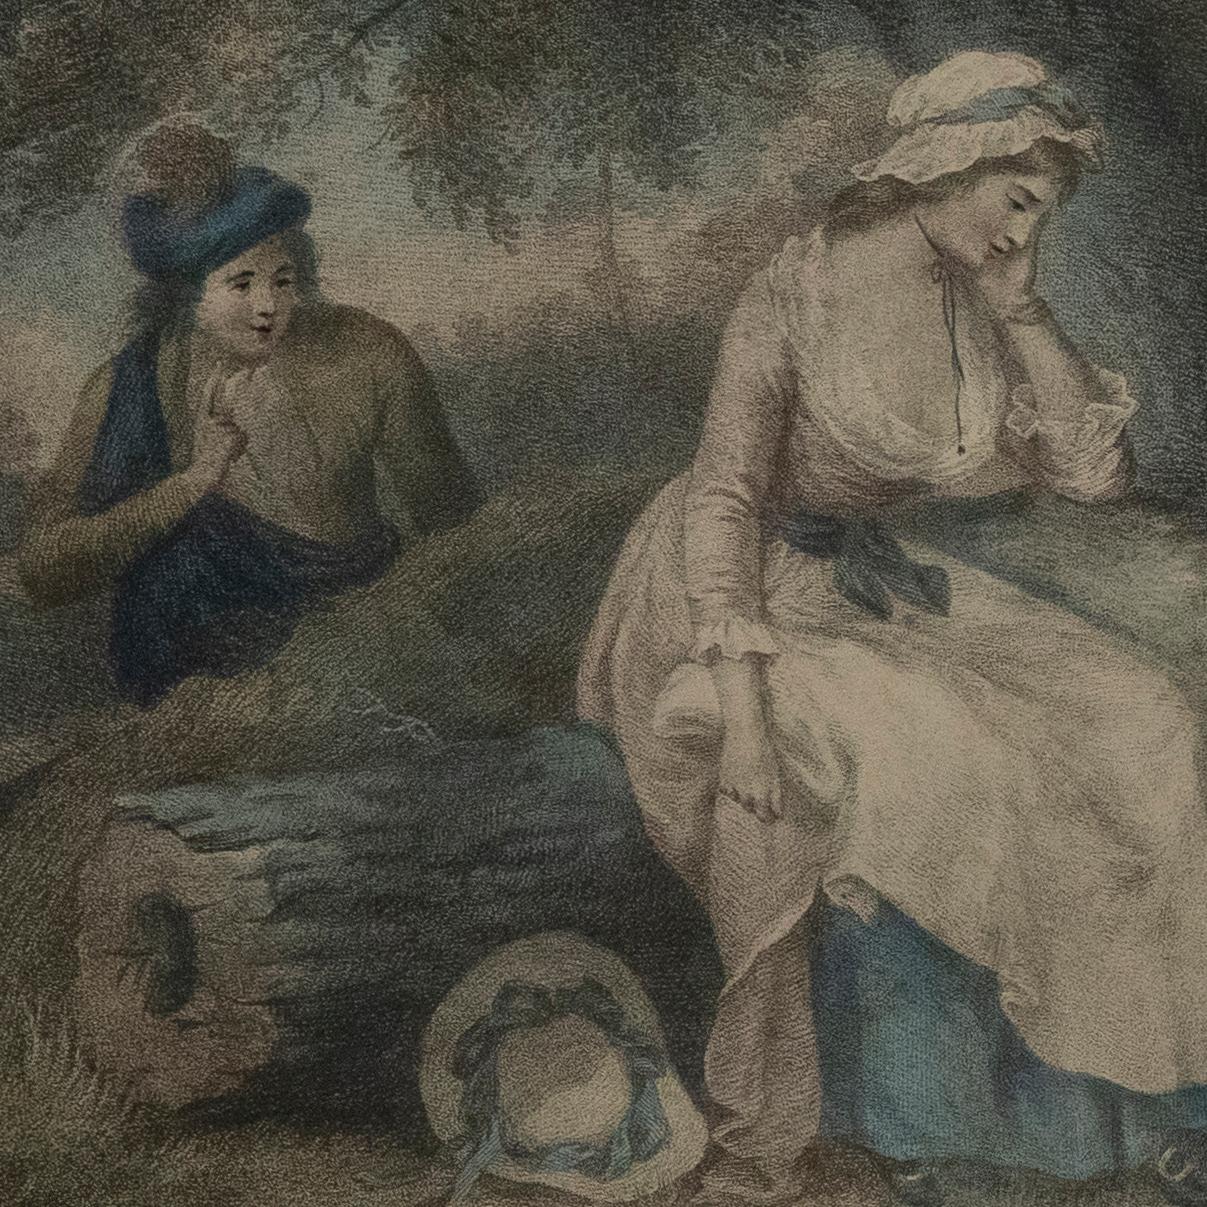 Two charming stipple engravings after paintings by George Morland (1763-1803). The first depicts a scene in the song The Lass of Livingstone inspired by the popular Scottish song. The other is inscribed 'How sweet's the love that meets return. When